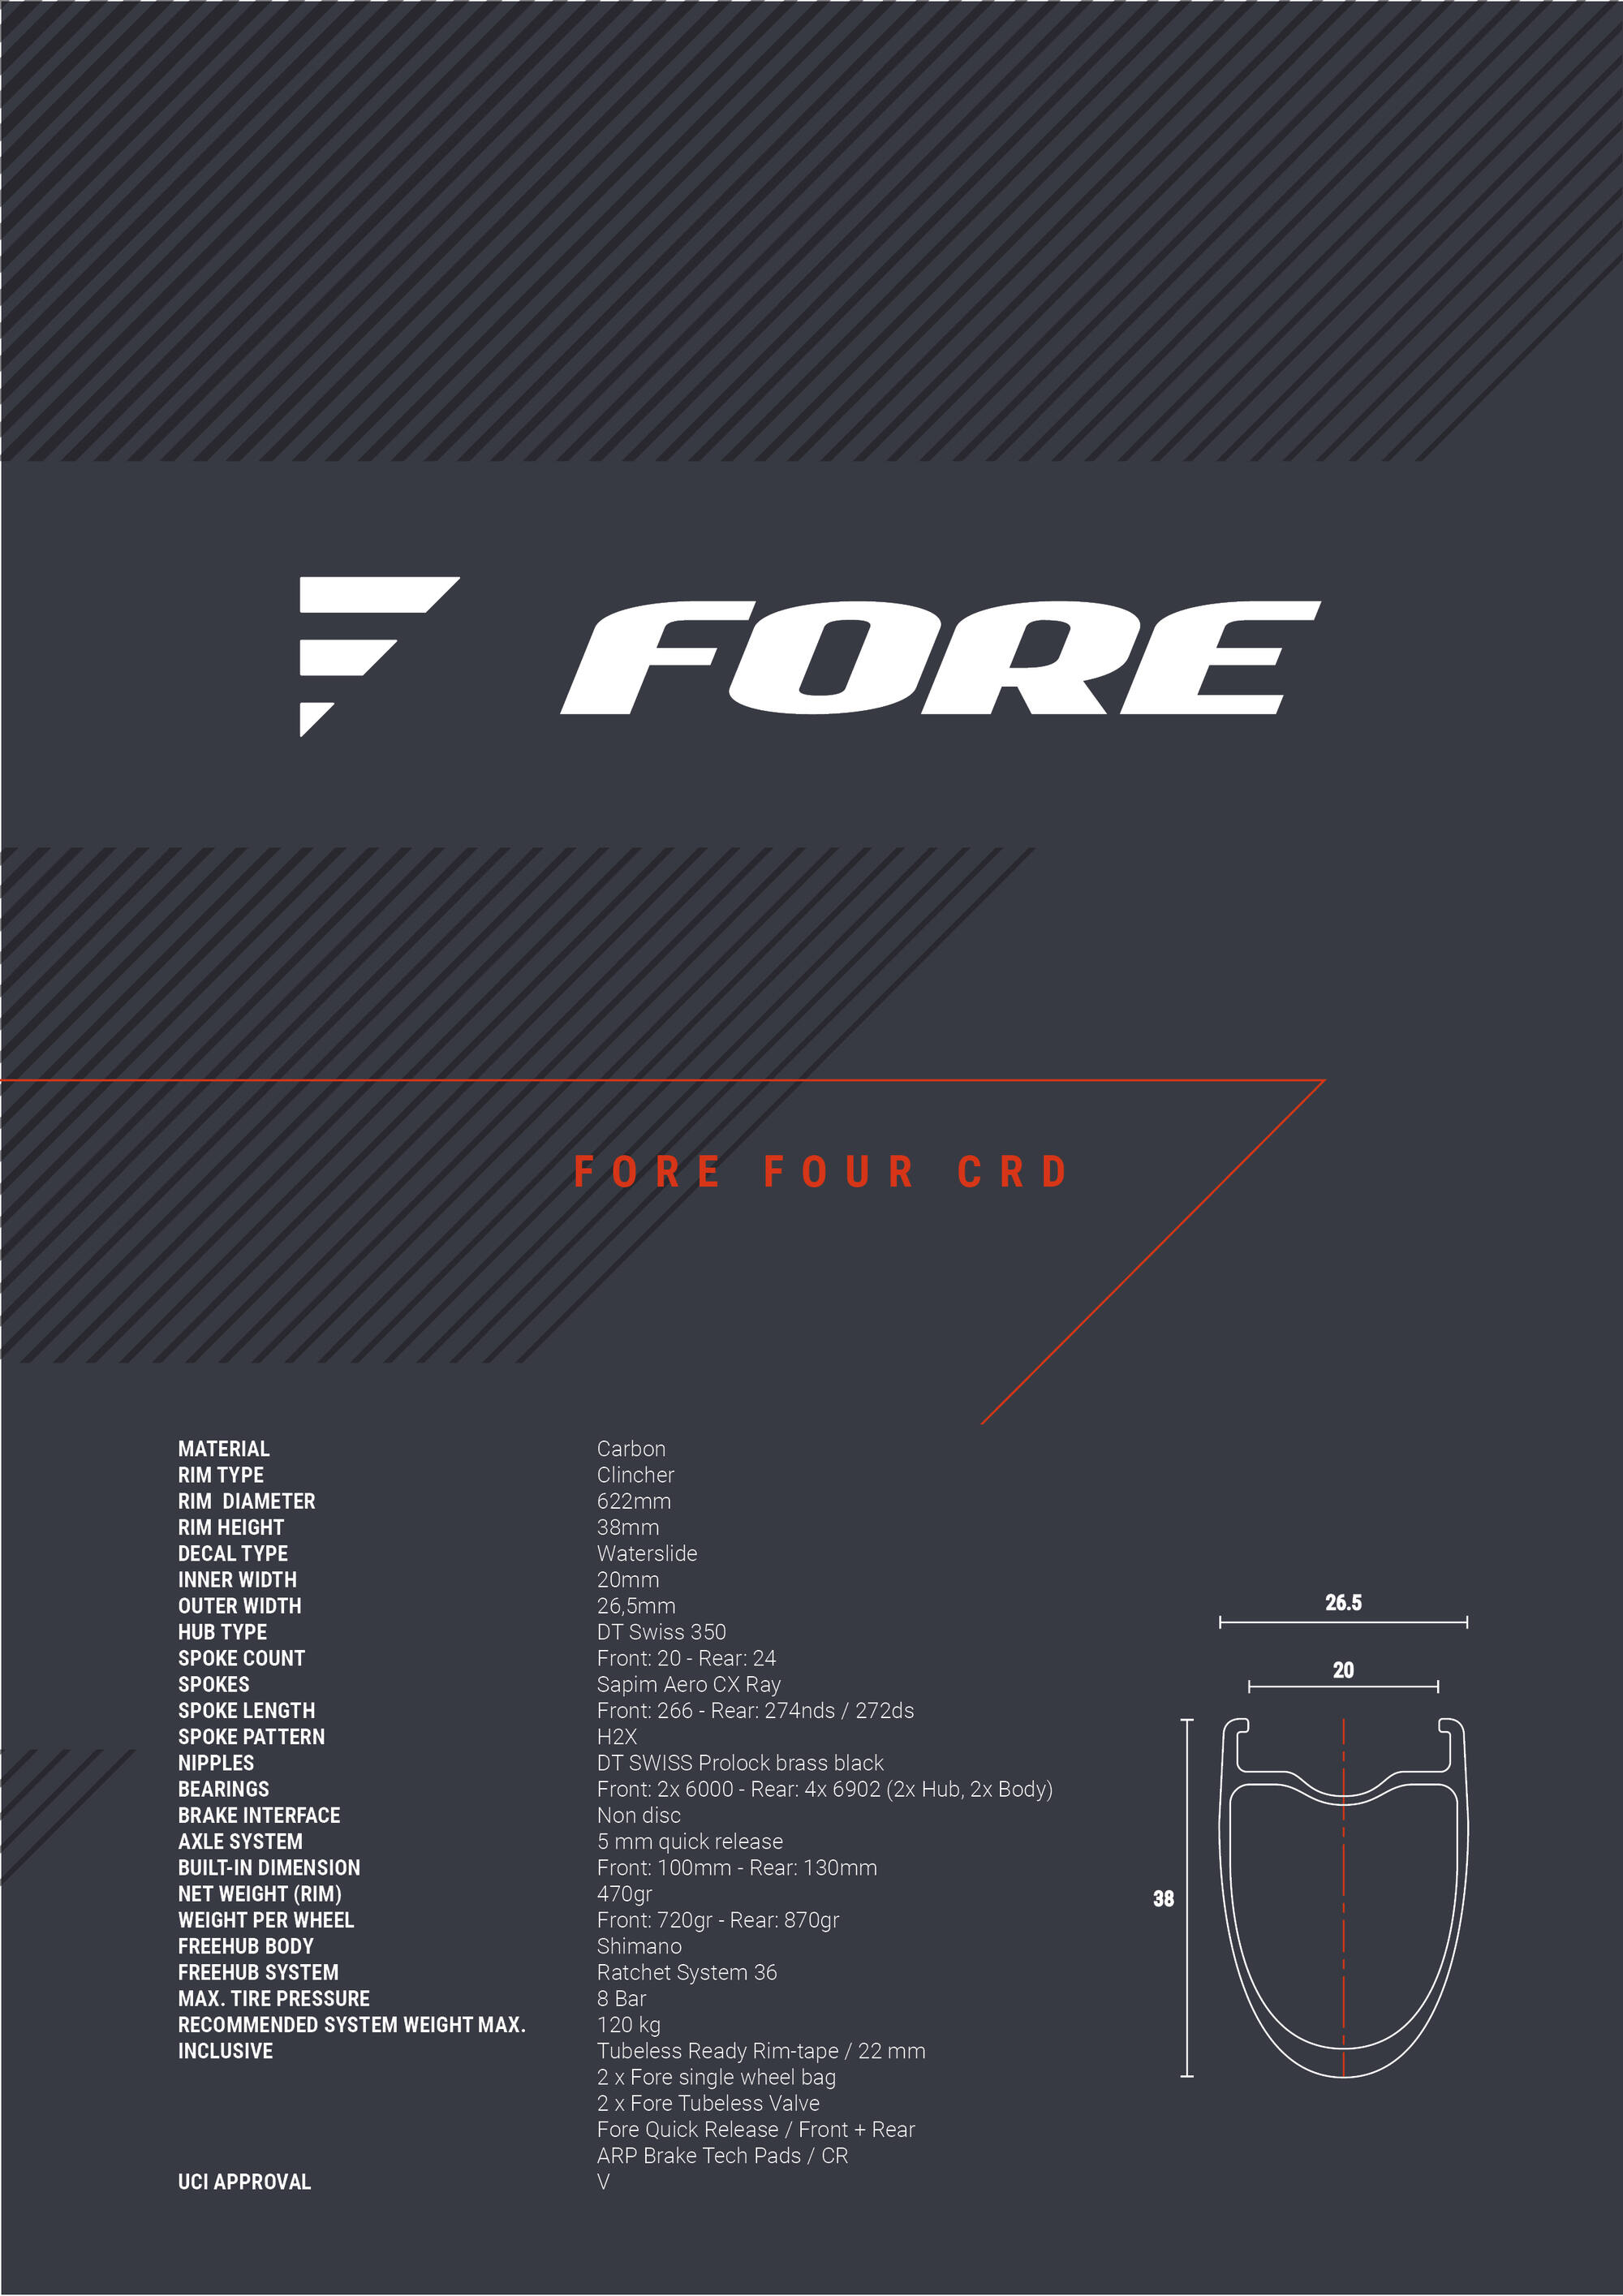 Fore - Four CRD